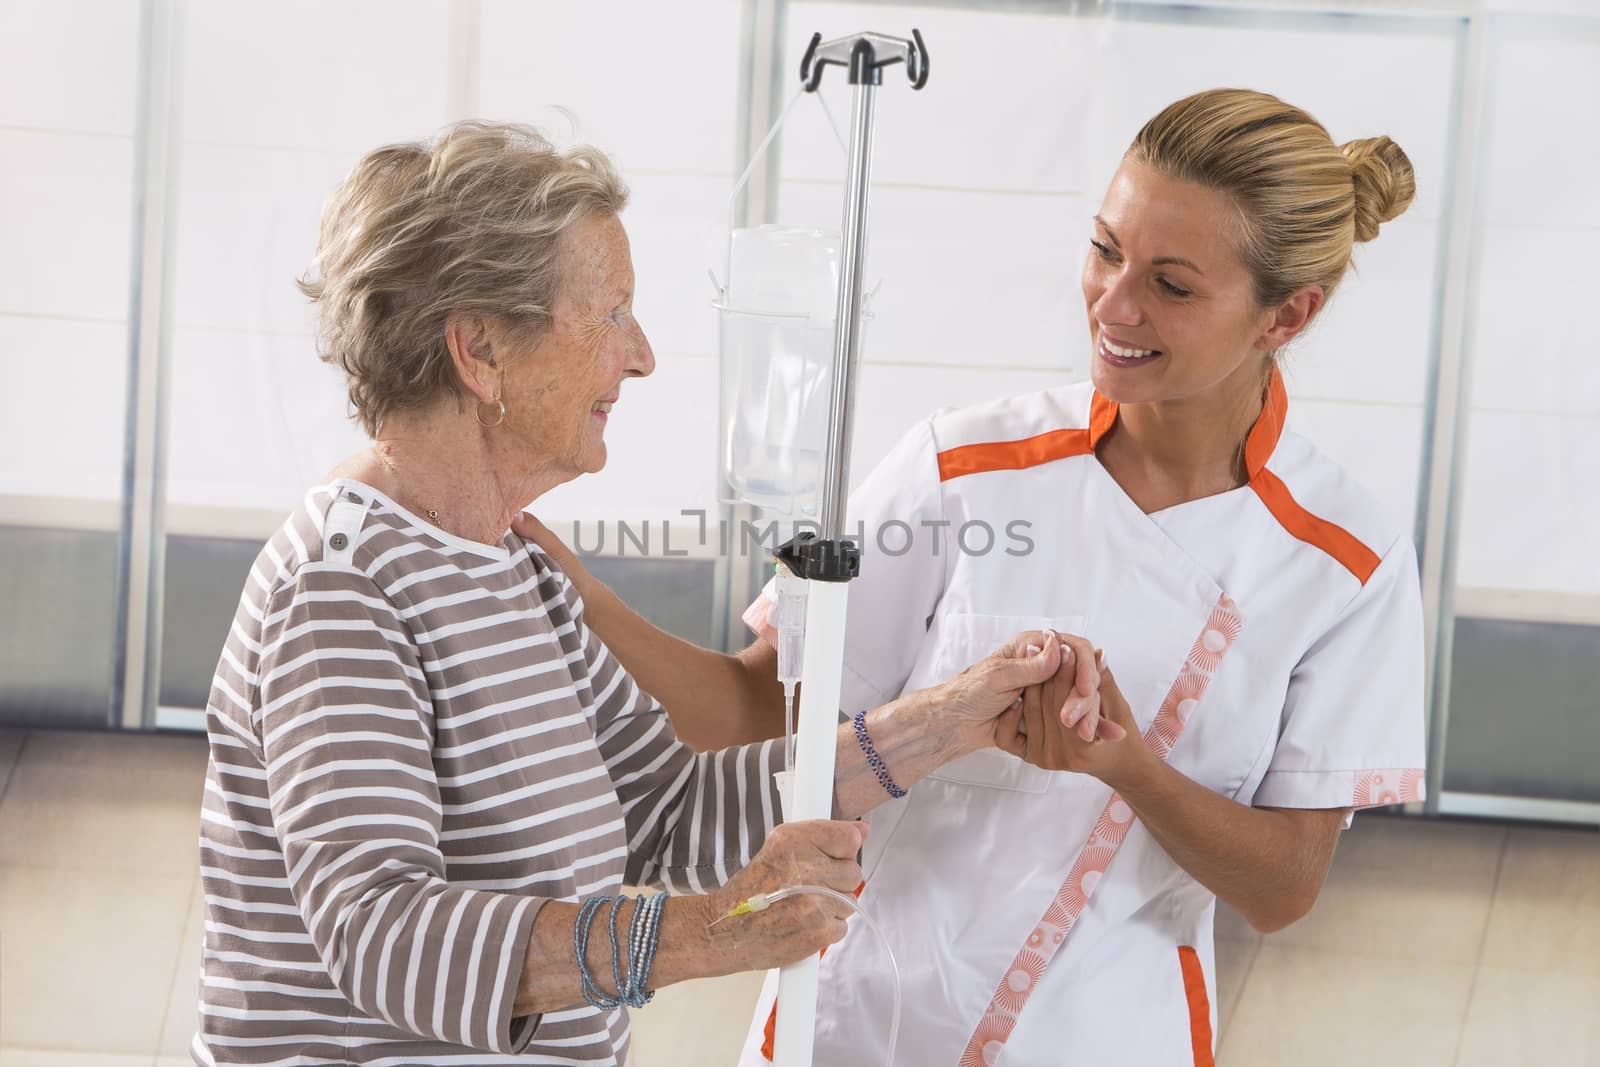 Nurse walking next to a patient with IV drip by JPC-PROD